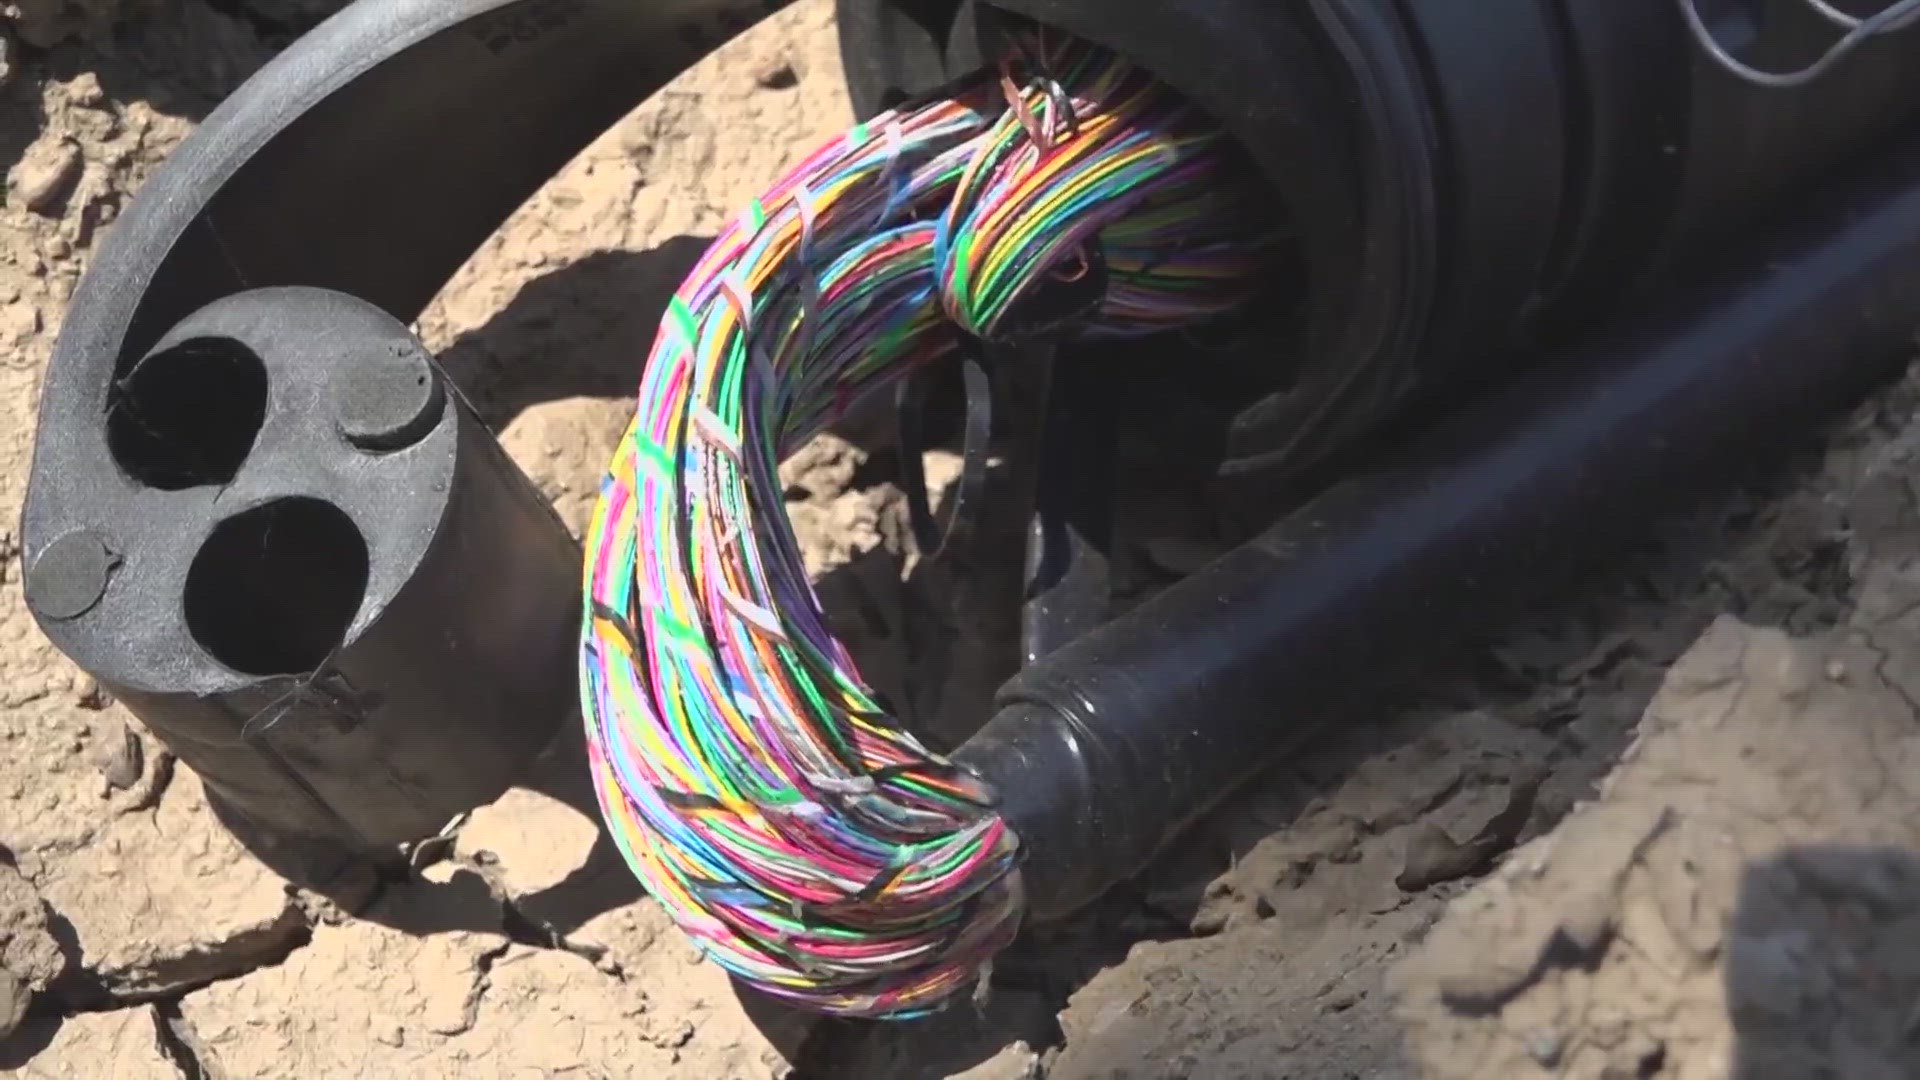 San Joaquin County now leads the nation in copper wire thefts with a 139% increase over the last four months, officials say.